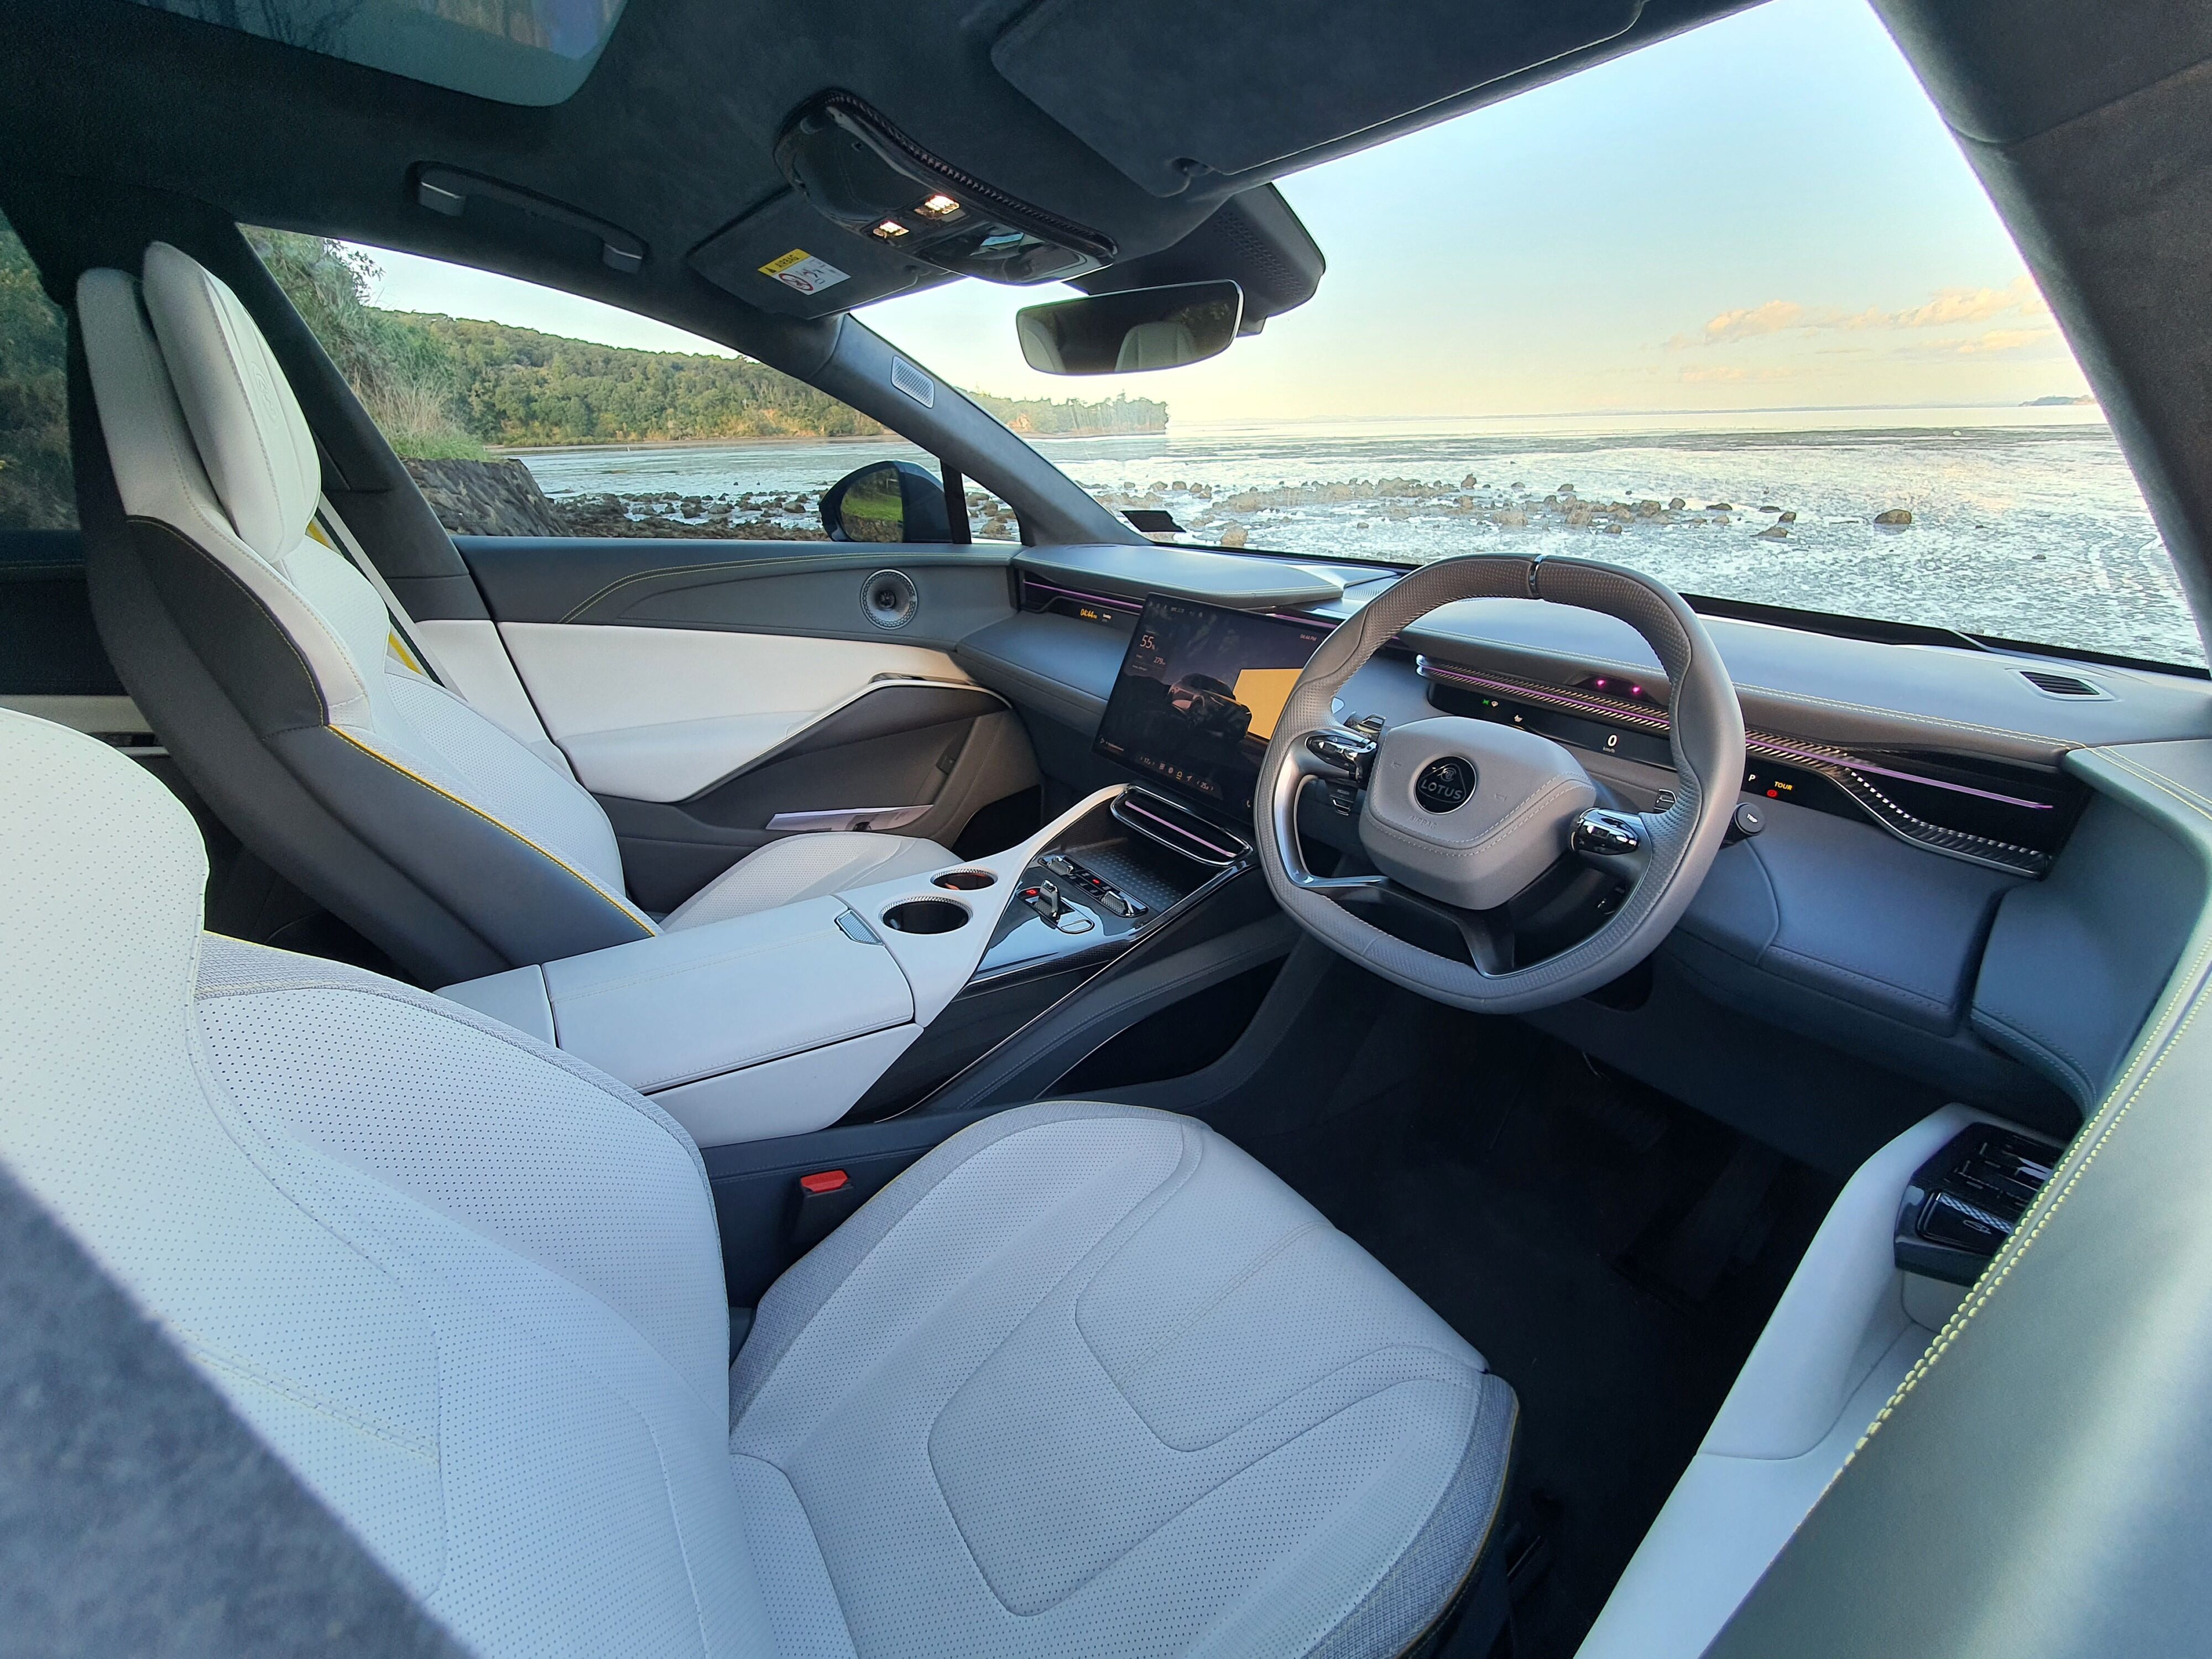 Quartz optioned interior on a 2024 Lotus Eletre S with a coastal outlook from the windscreen.